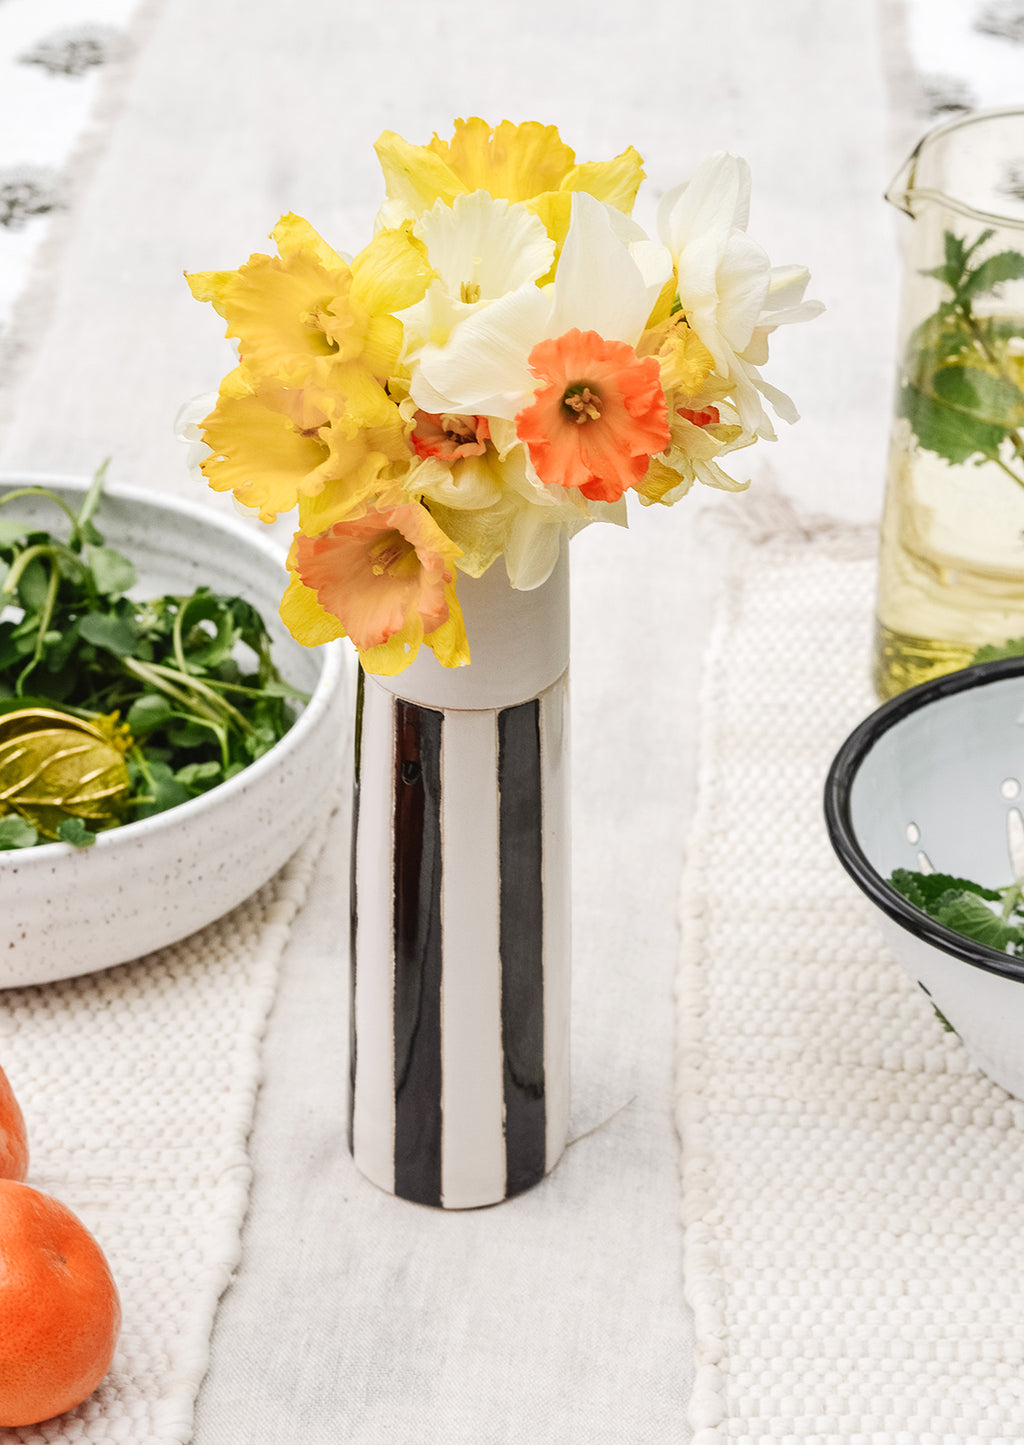 2: A black and white vase on a table with daffodils.